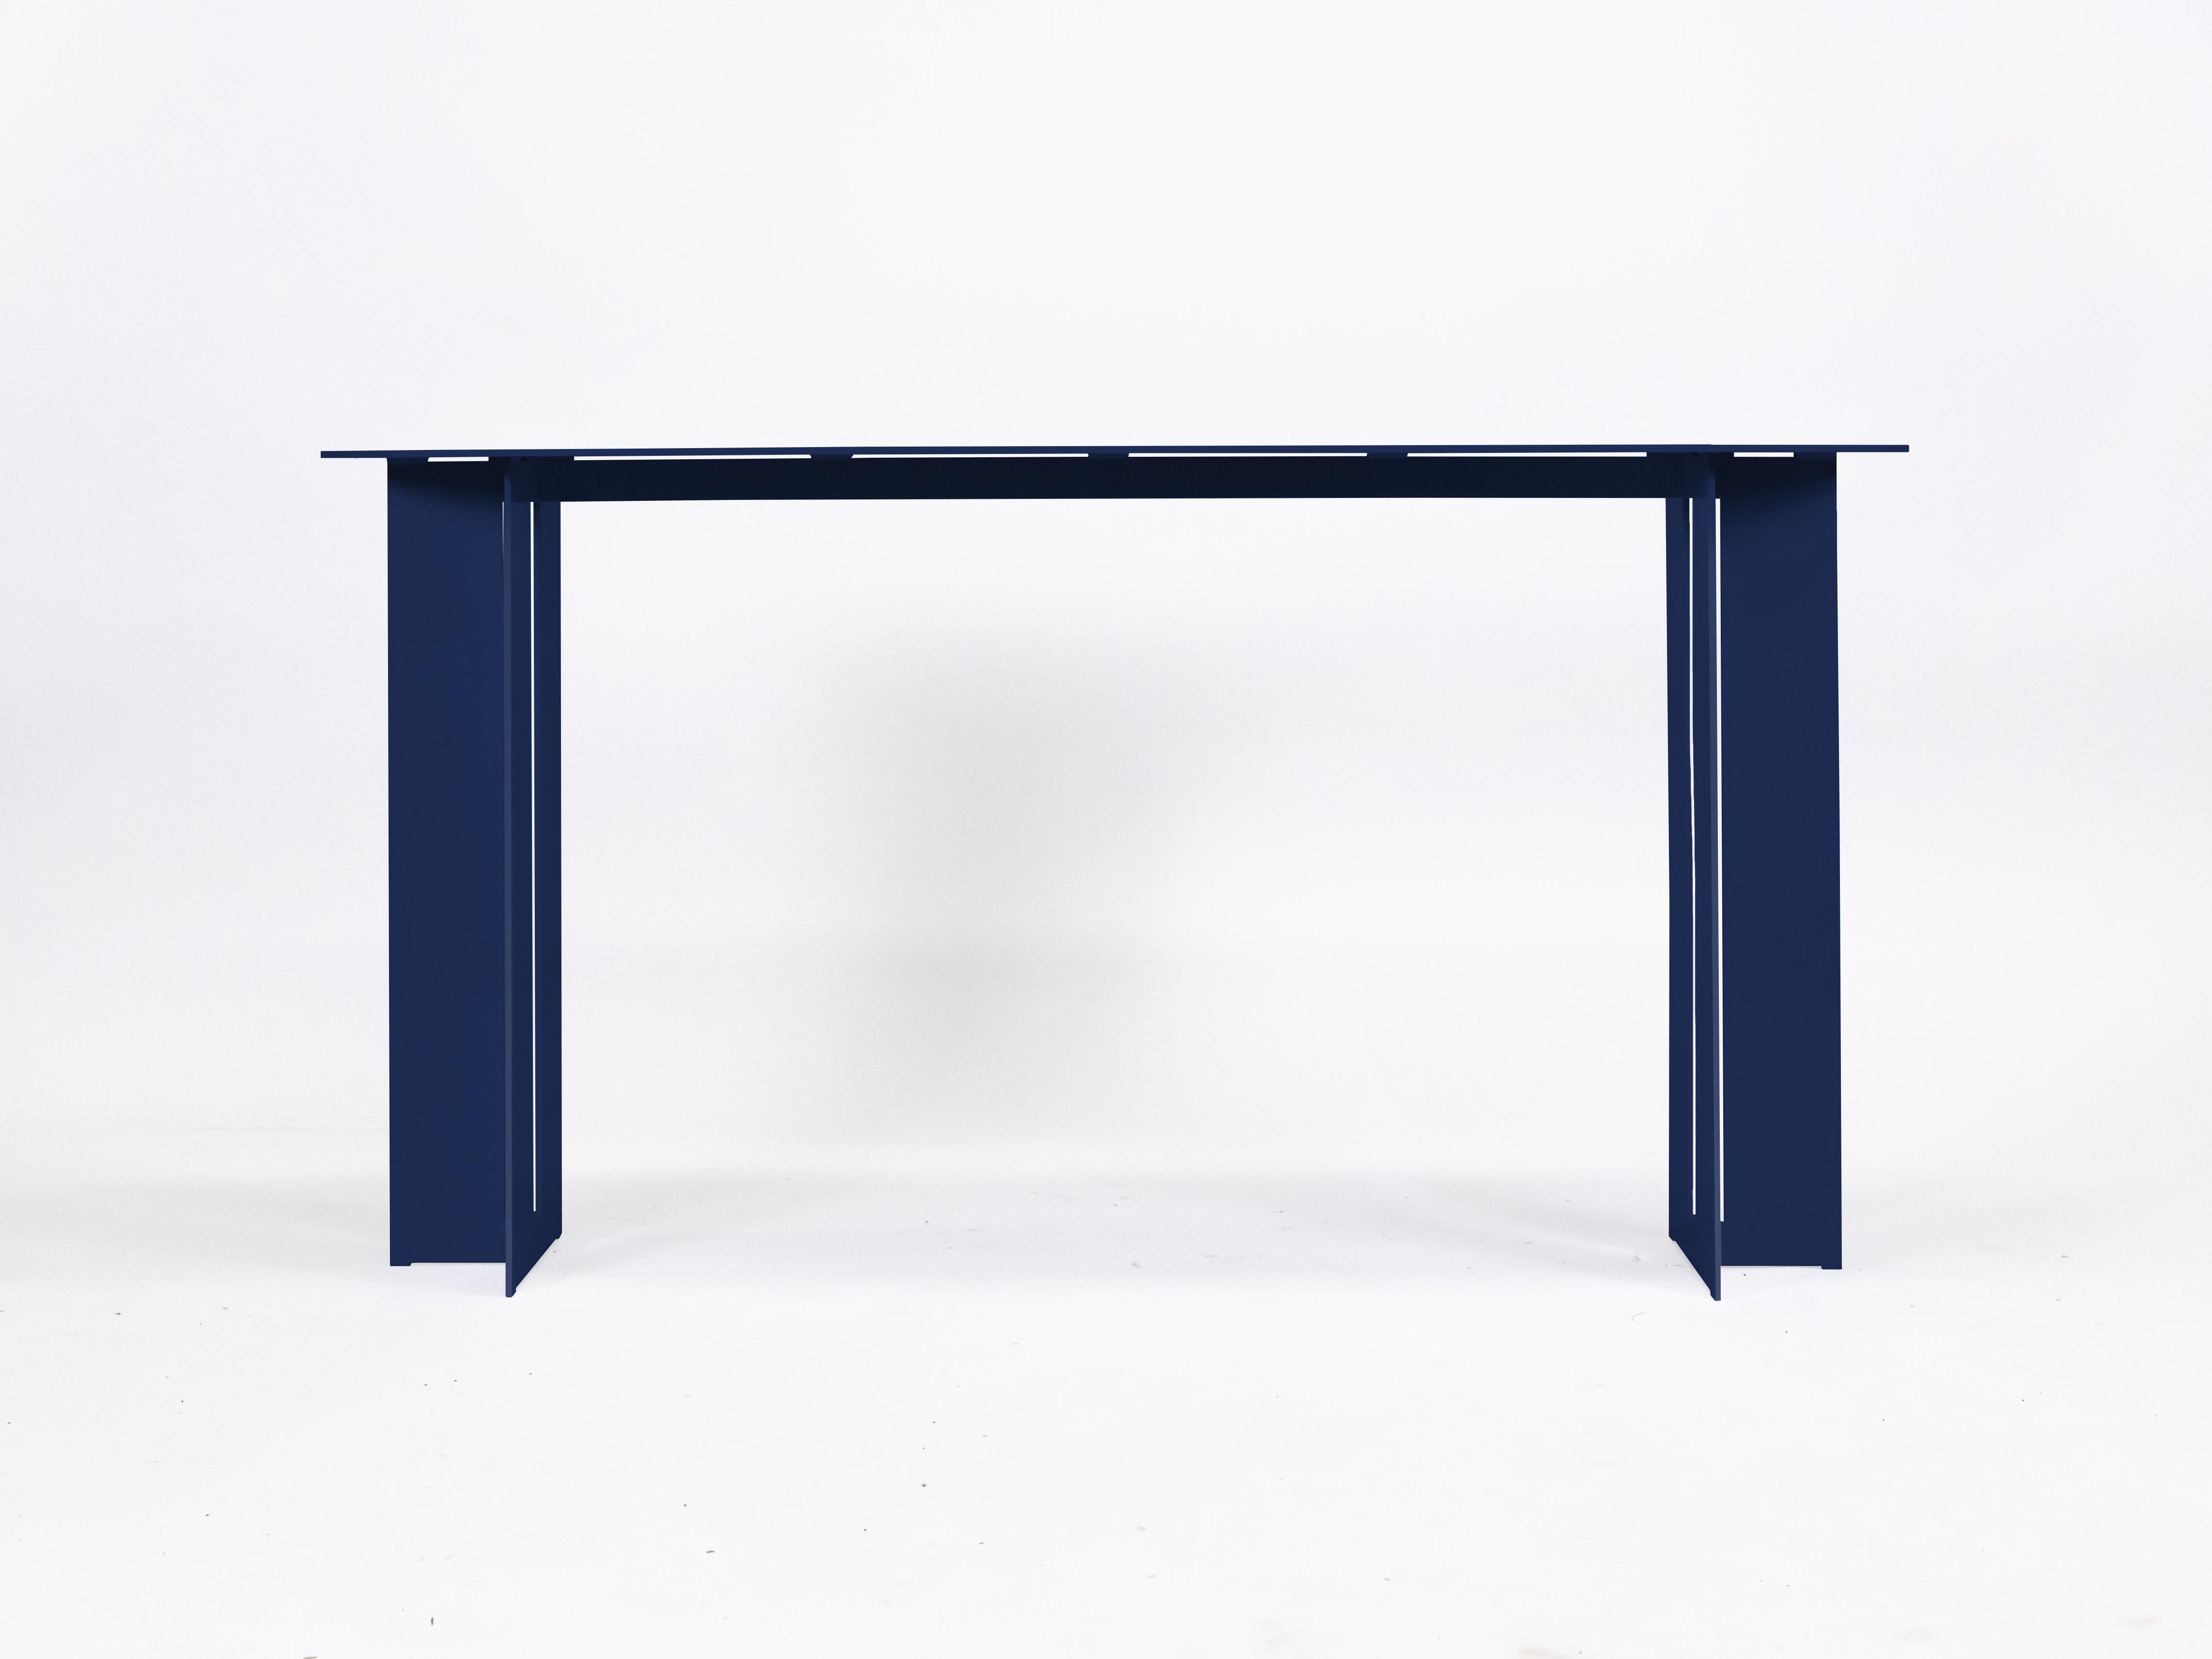 The Mers console table is fabricated from solid aluminum with powdercoat finish. It is suitable for use indoors and out. 

Shown in aluminum with pacific blue painted finish.
Custom sizing and colors available.

Overall dimensions: 60